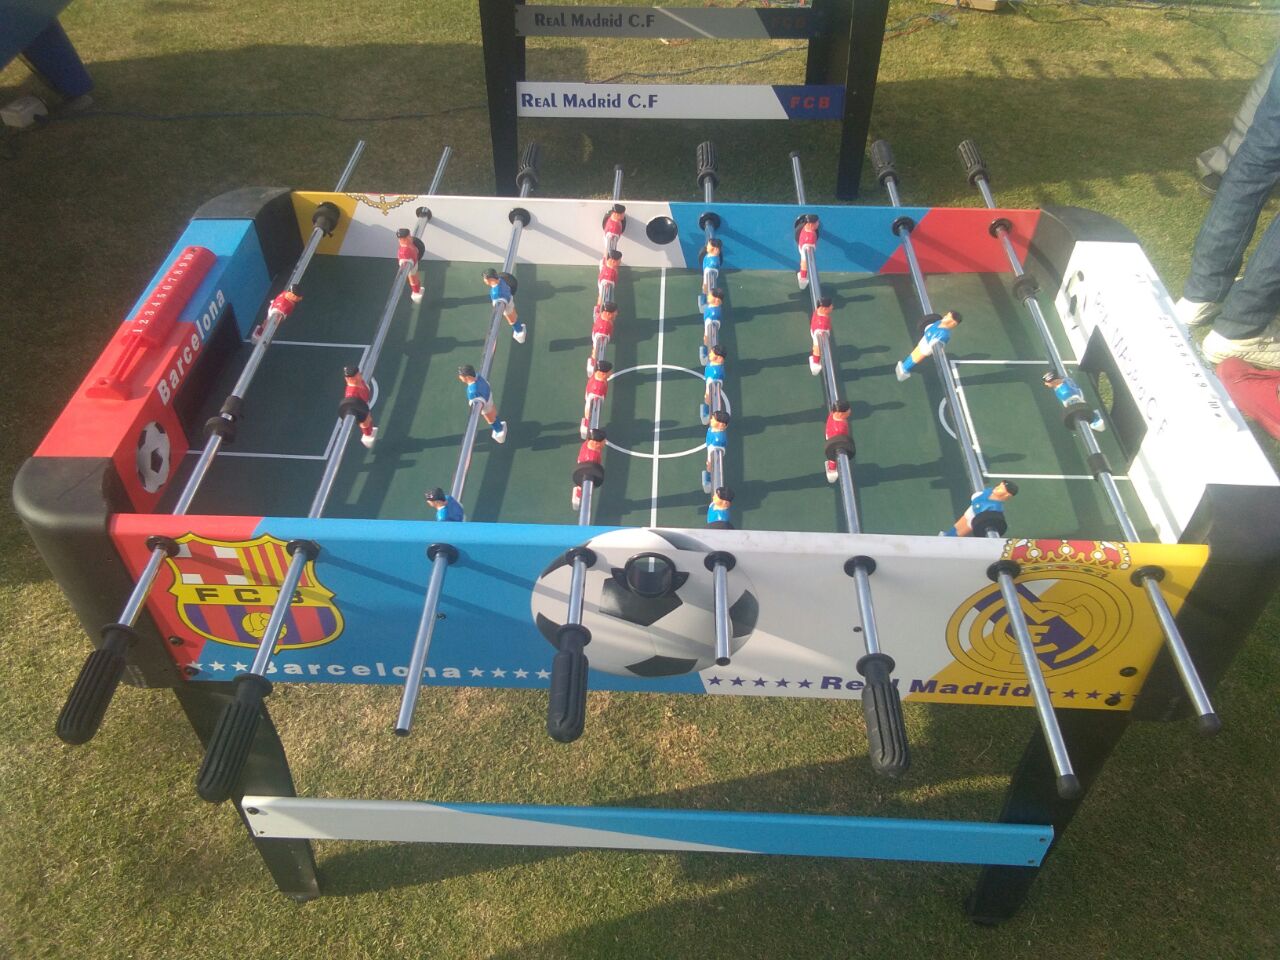 Foos Ball Table On Rent For Corporate & Birthday Party